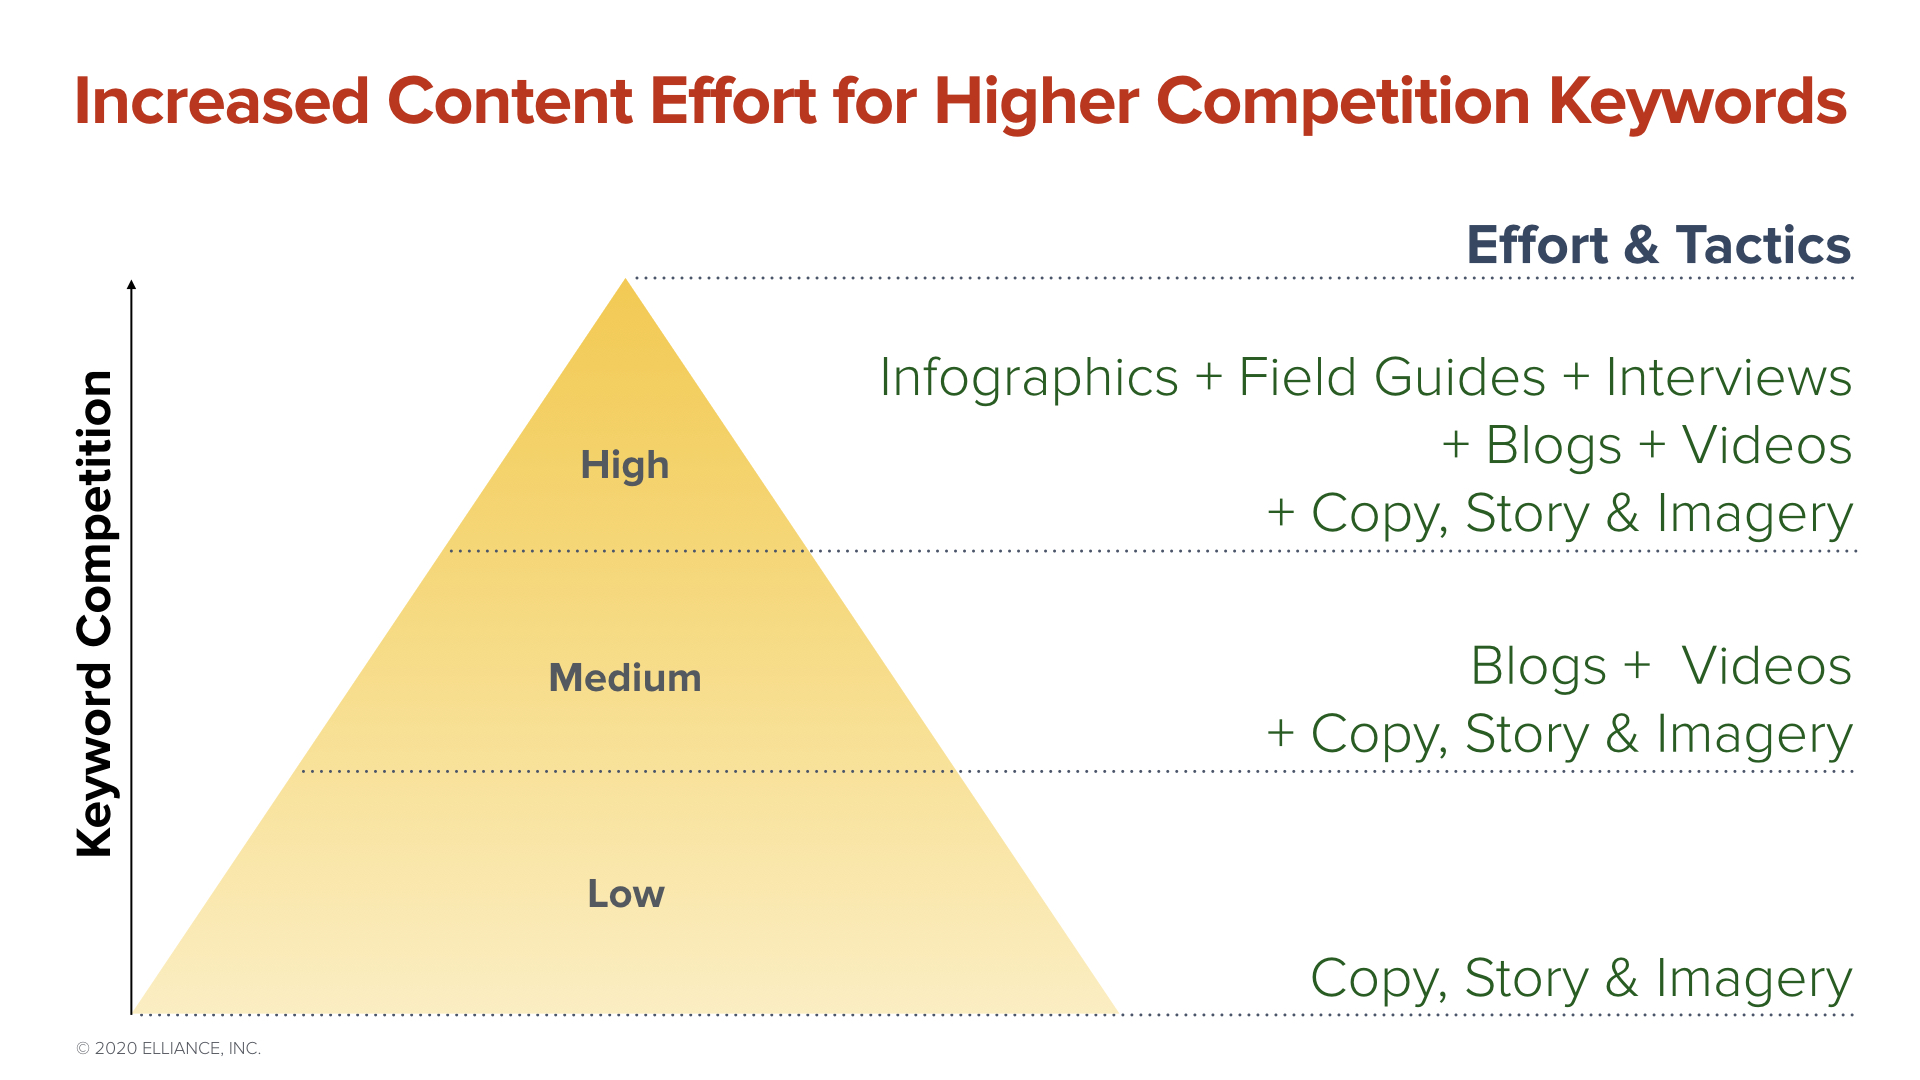 Increased Content Effort Required for Higher Competition Keywords